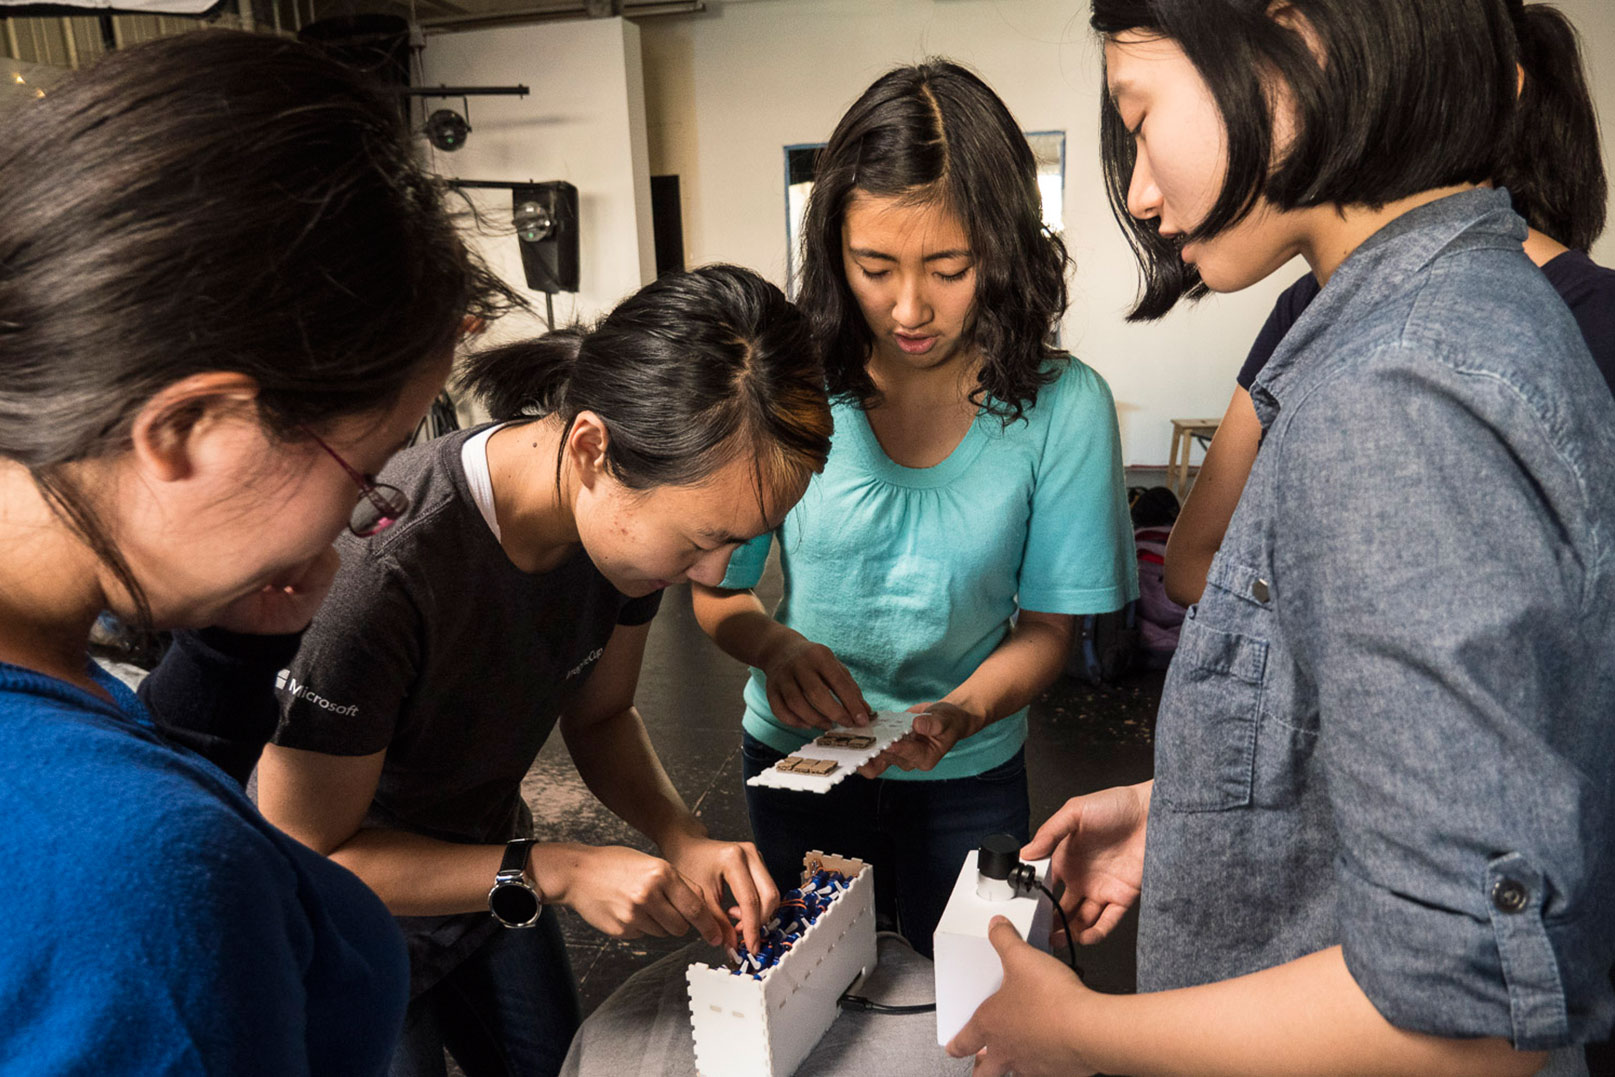 Photo of three students gathered around a fourth, who has her head down and is adjusting wires in the rectangular prototype